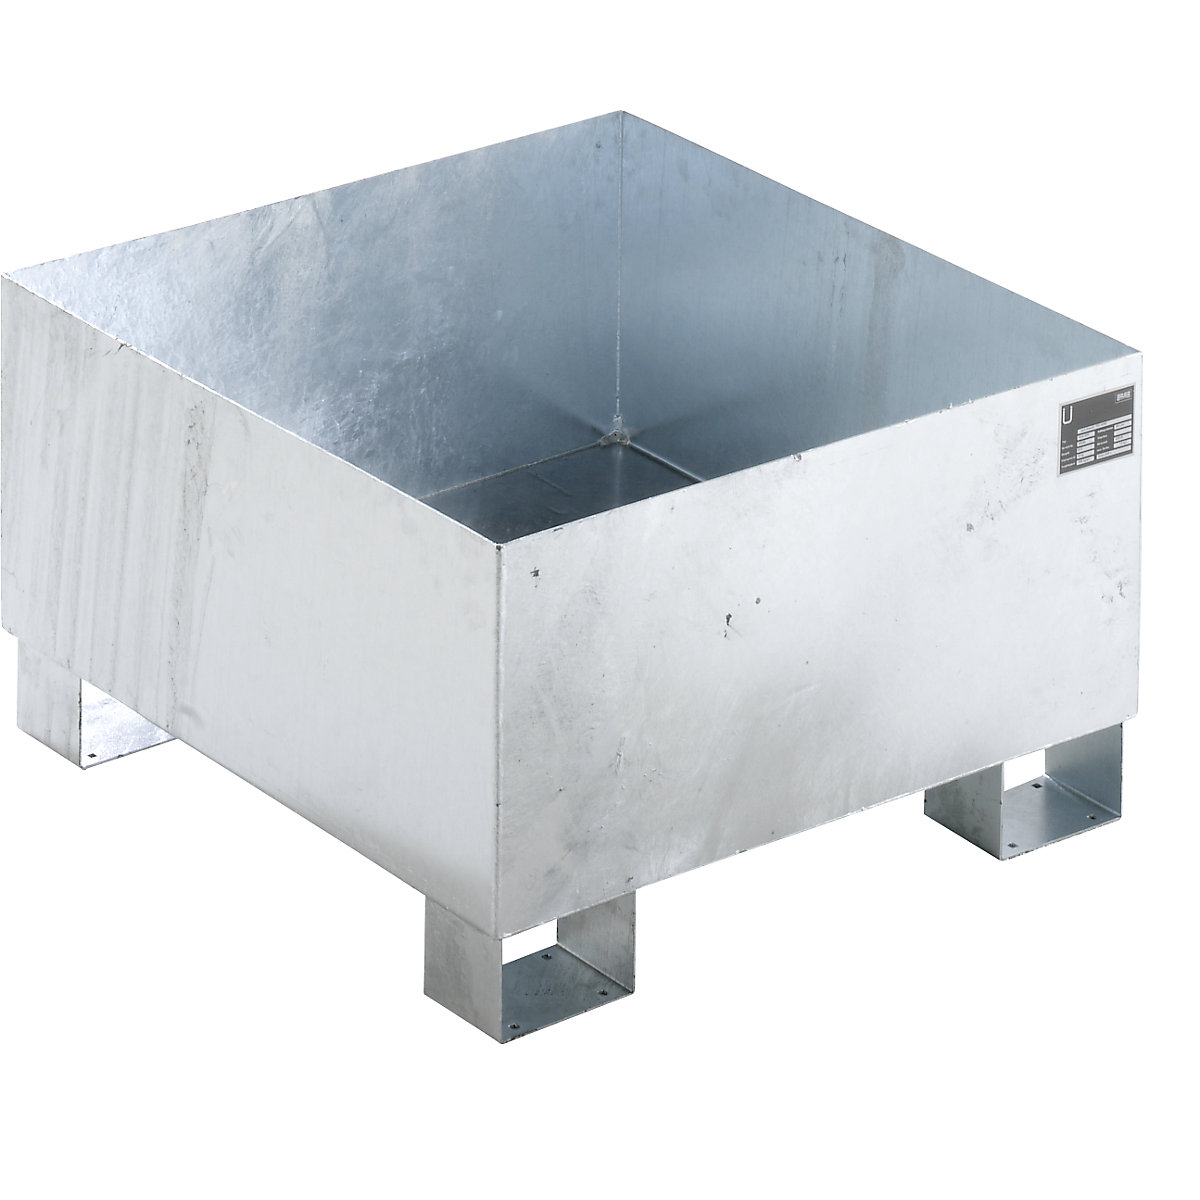 Sump tray made from sheet steel, LxWxH 800 x 800 x 465 mm, hot dip galvanised